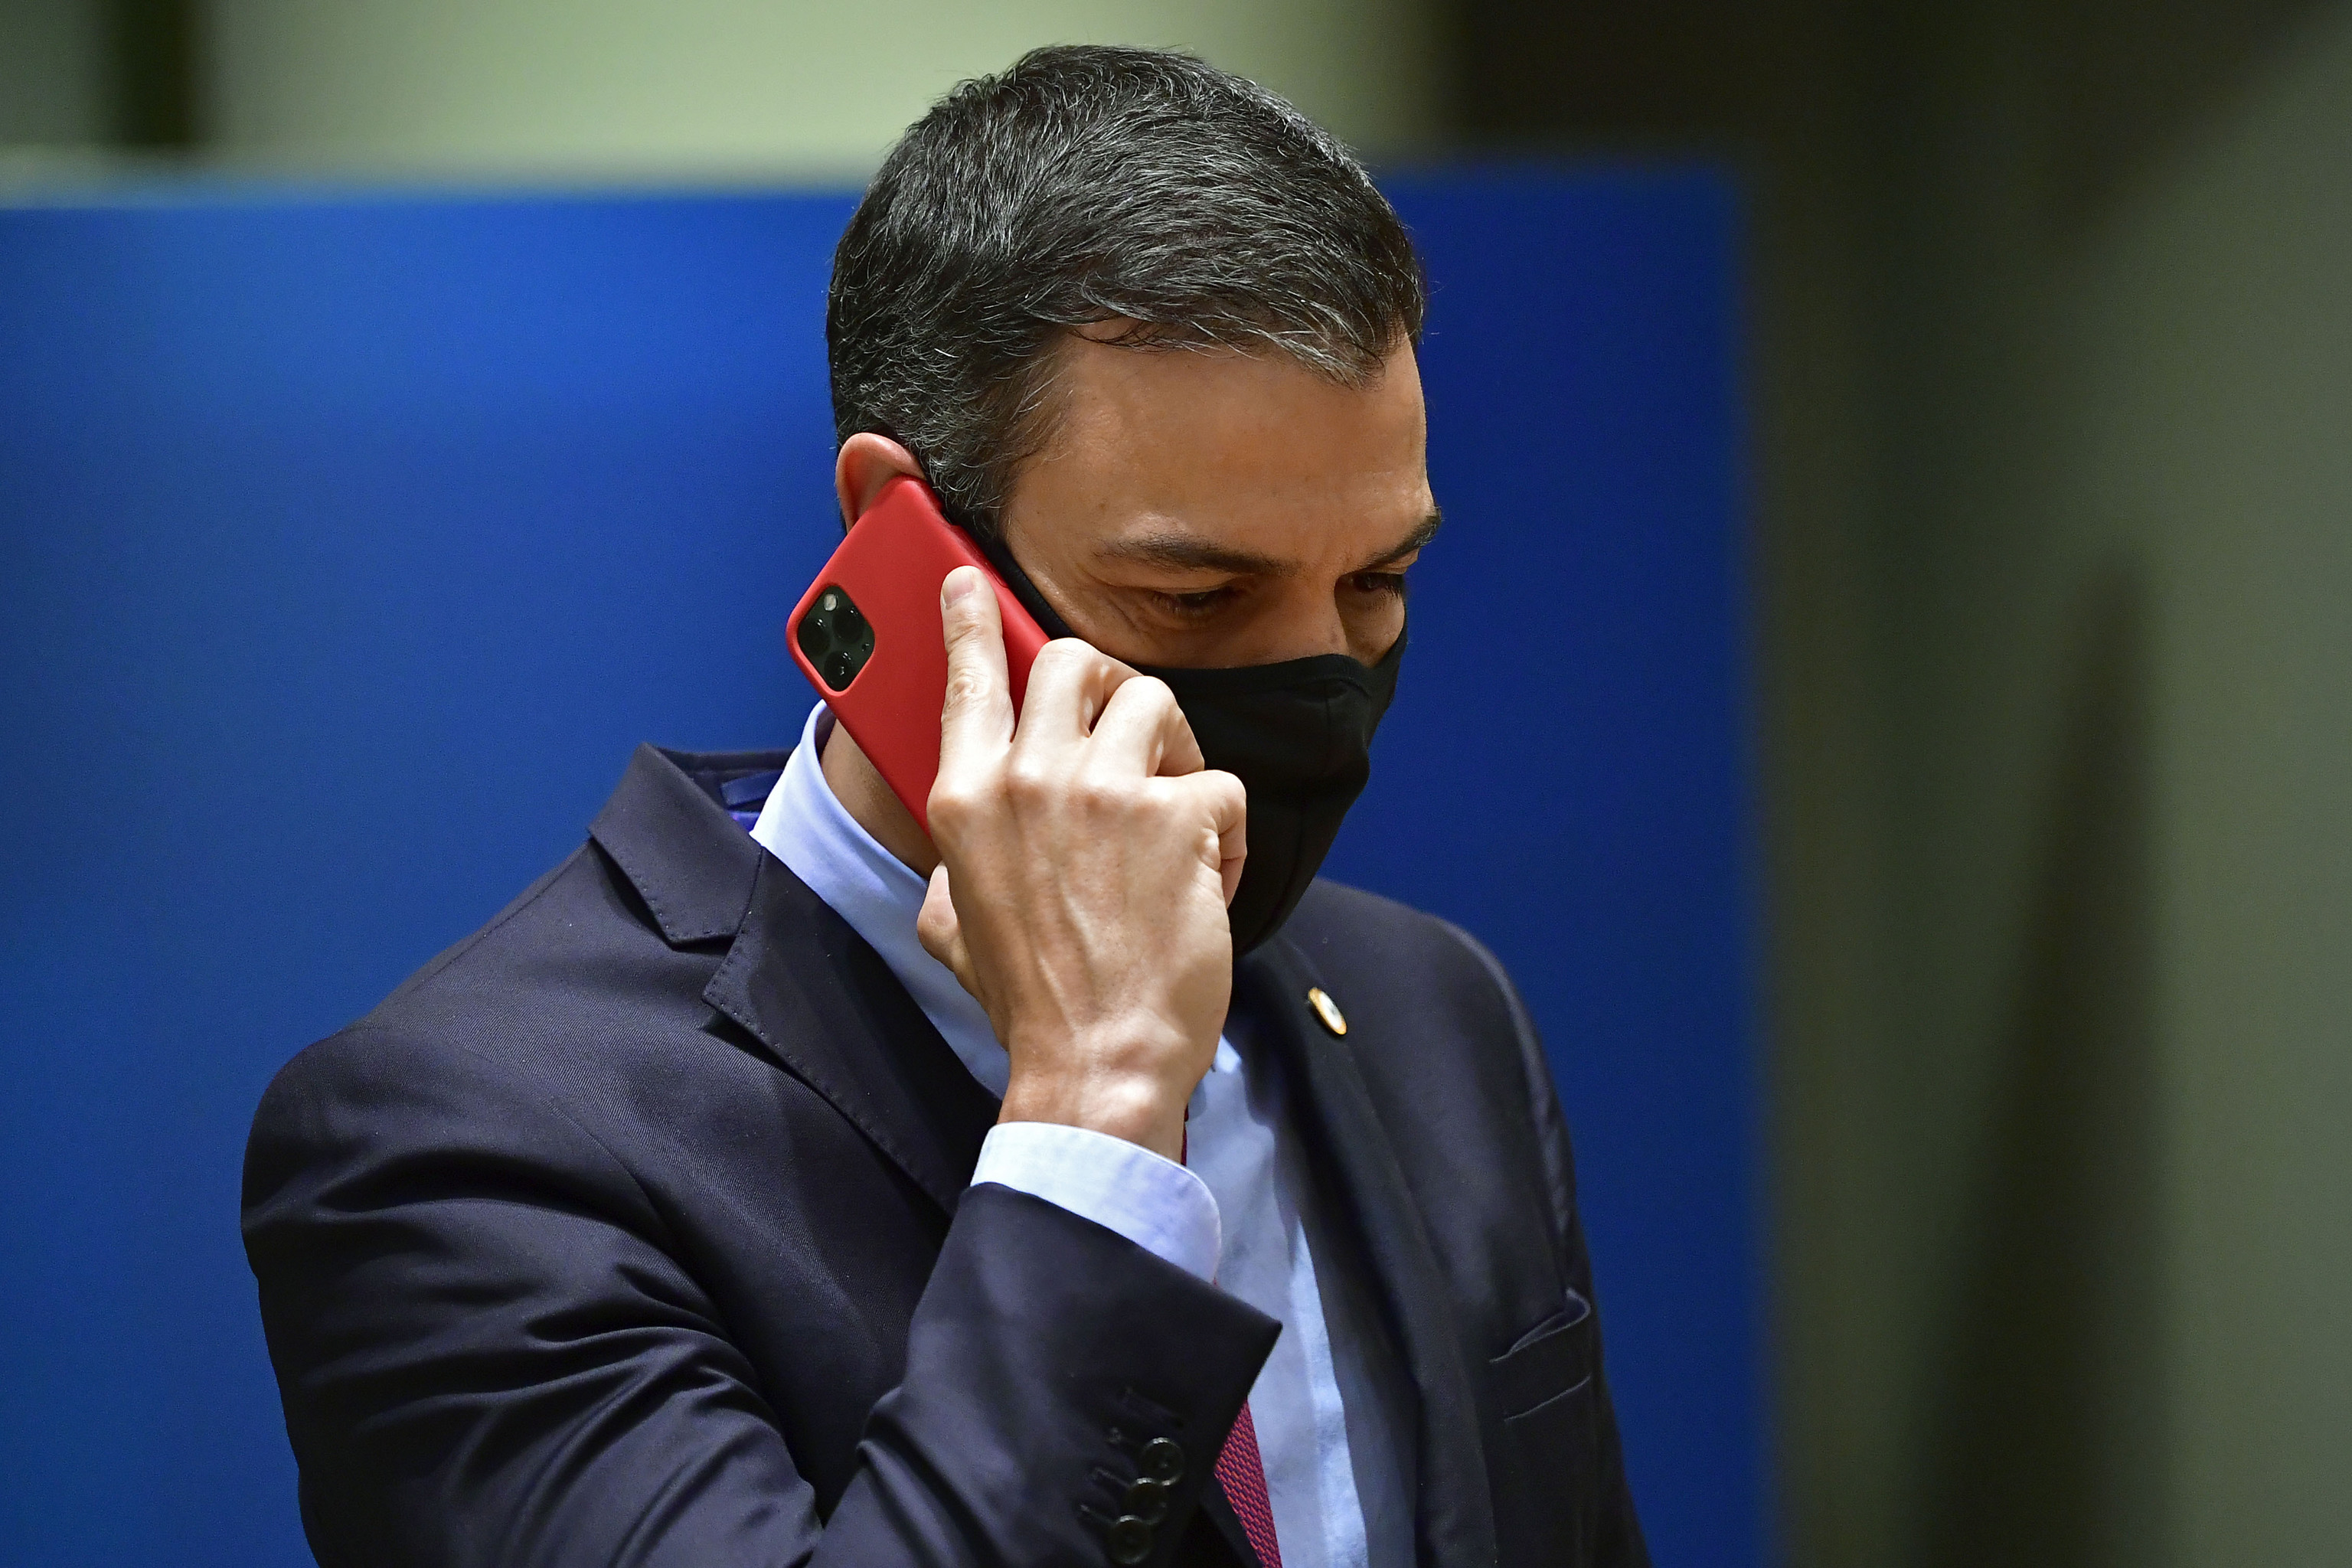 FILE - Spain's Prime Minister  lt;HIT gt;Pedro lt;/HIT gt;  lt;HIT gt;Sanchez lt;/HIT gt; speaks on his cell phone during a round table meeting at an EU summit in Brussels, Monday, July 20, 2020. Spanish officials said on Monday May 2, 2022 that the cellphones of the prime minister and the defense minister were infected with Pegasus spyware that is only available to government agencies, in an operation that was not authorised by the government. Reports detailing the breaches have been transferred to Spain's National Court for further investigation. (John Thys, Pool Photo via AP, File)